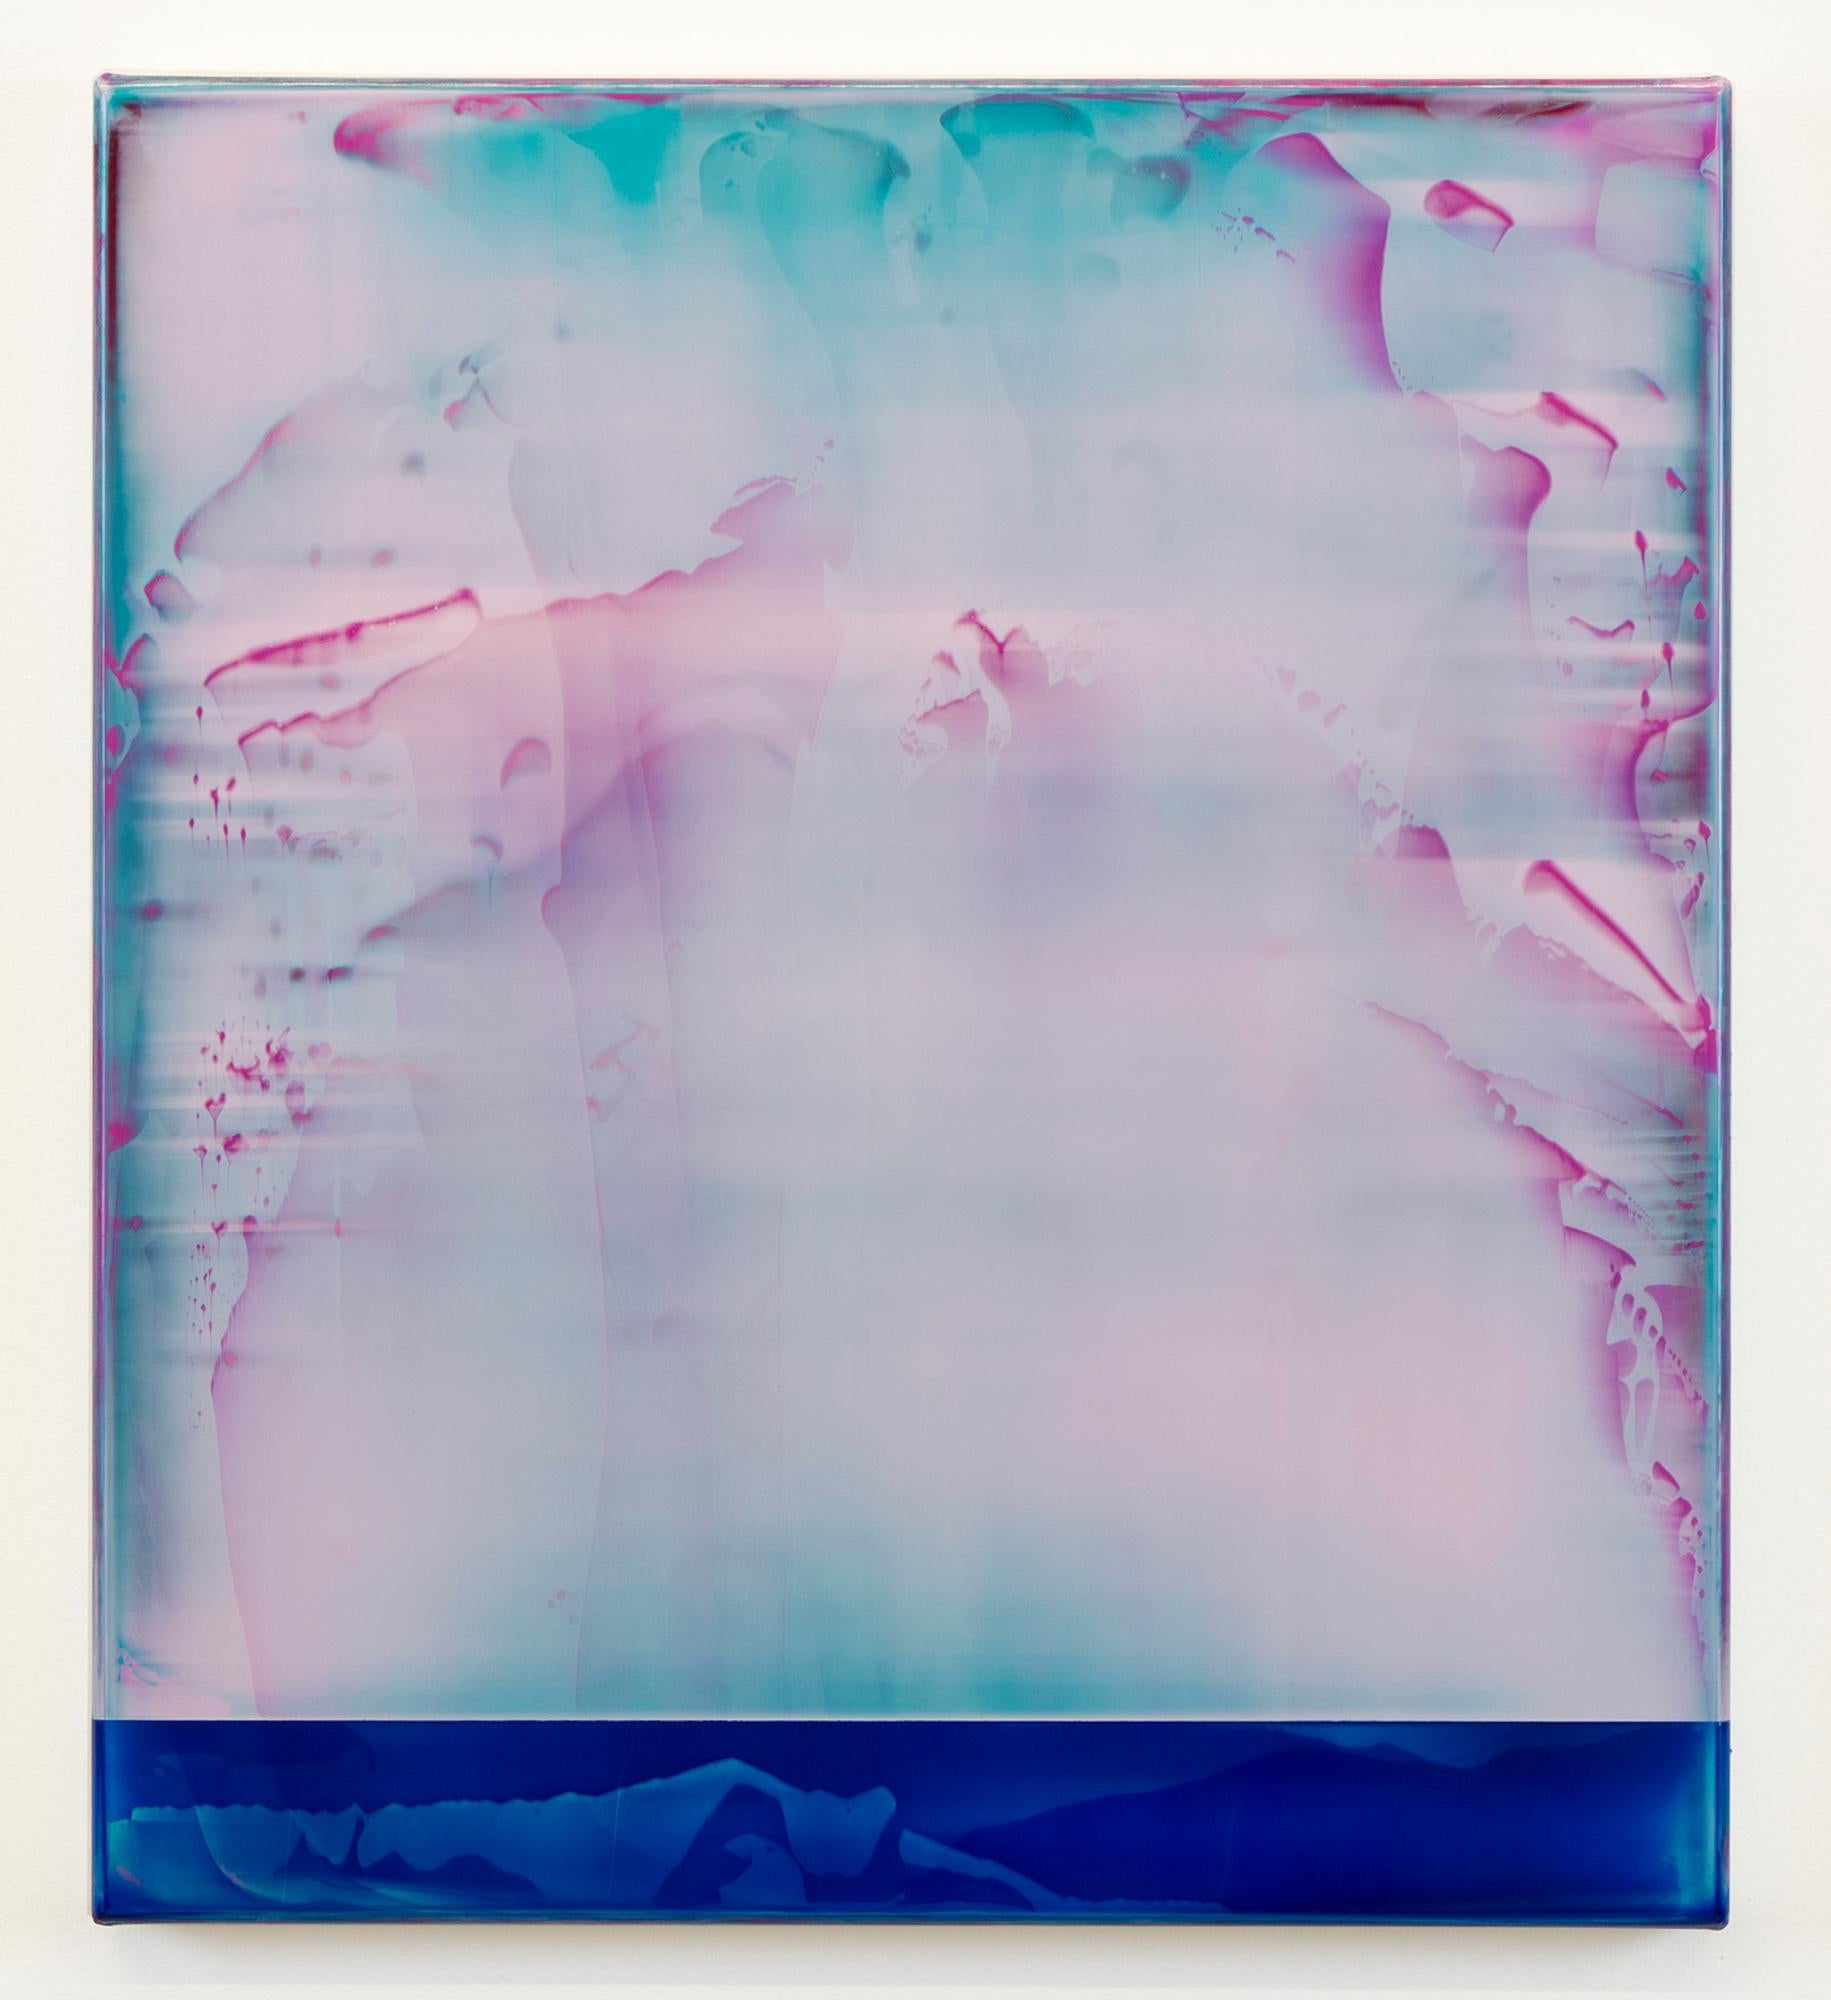 Lucent (2/19) by James Lumsden - Abstract colour painting, pink and light blue For Sale 2